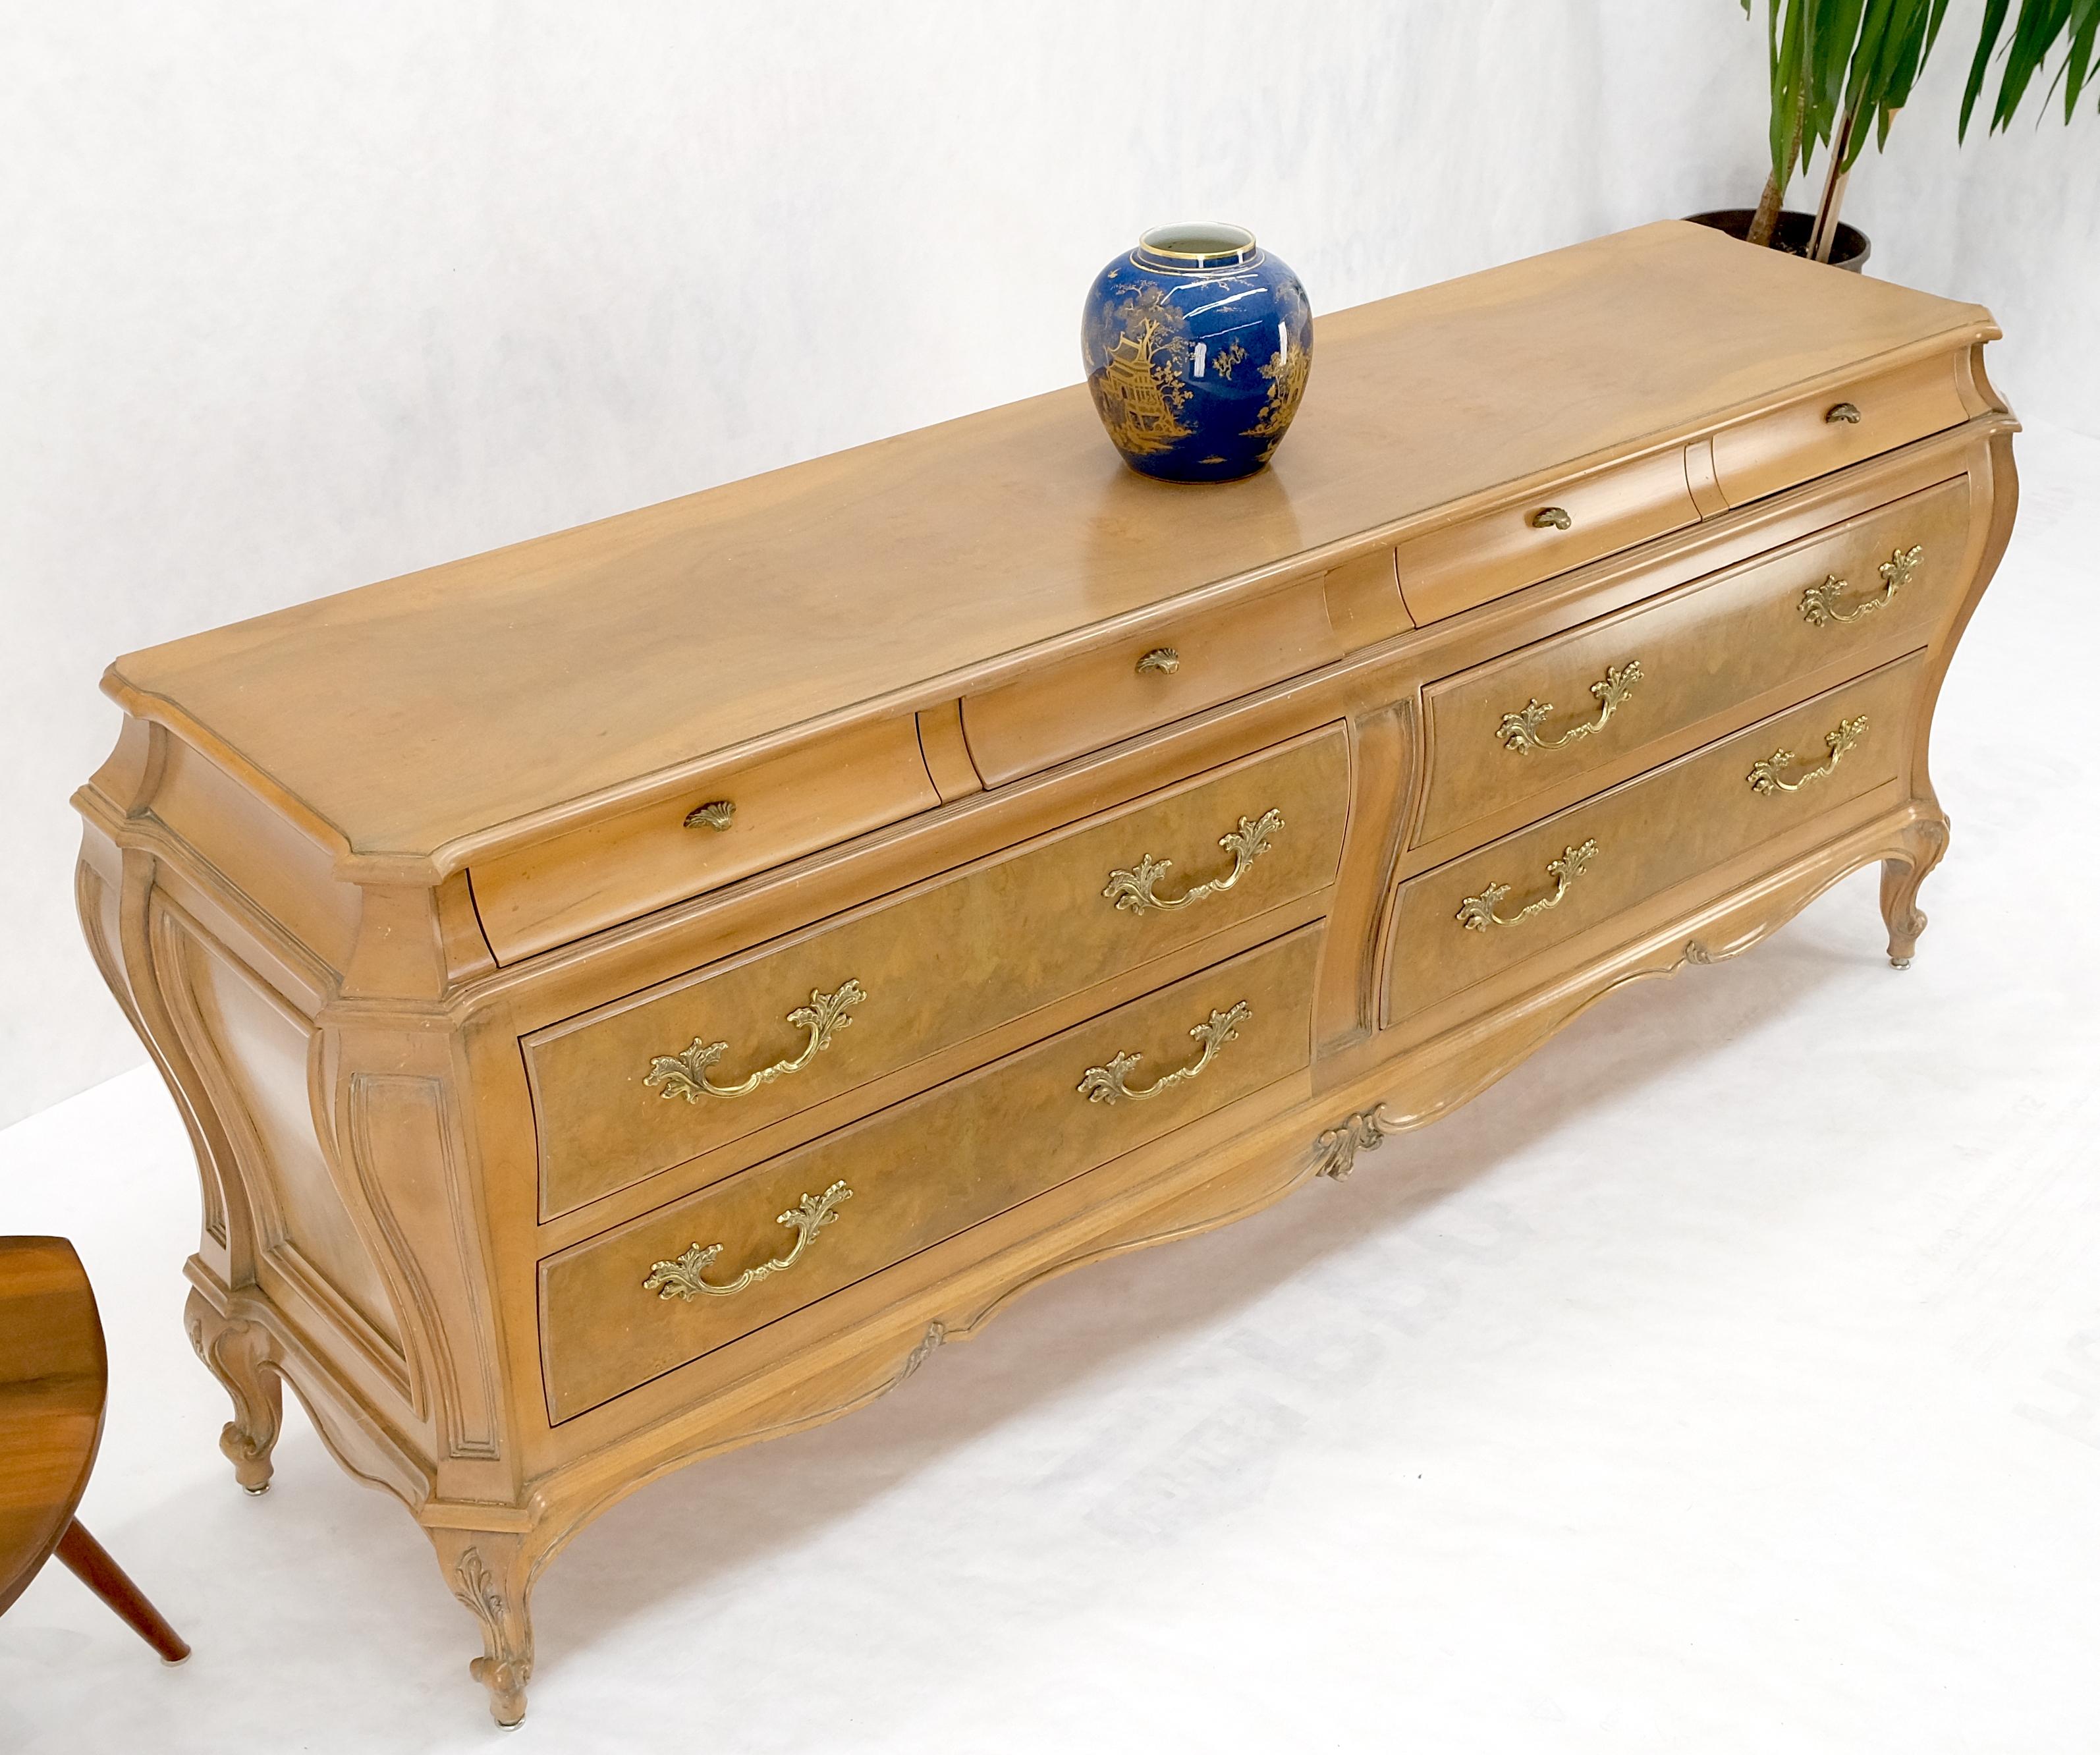 Long Country French bombe 8 tiroir white wash burl wood dresser credenza solid & mint !